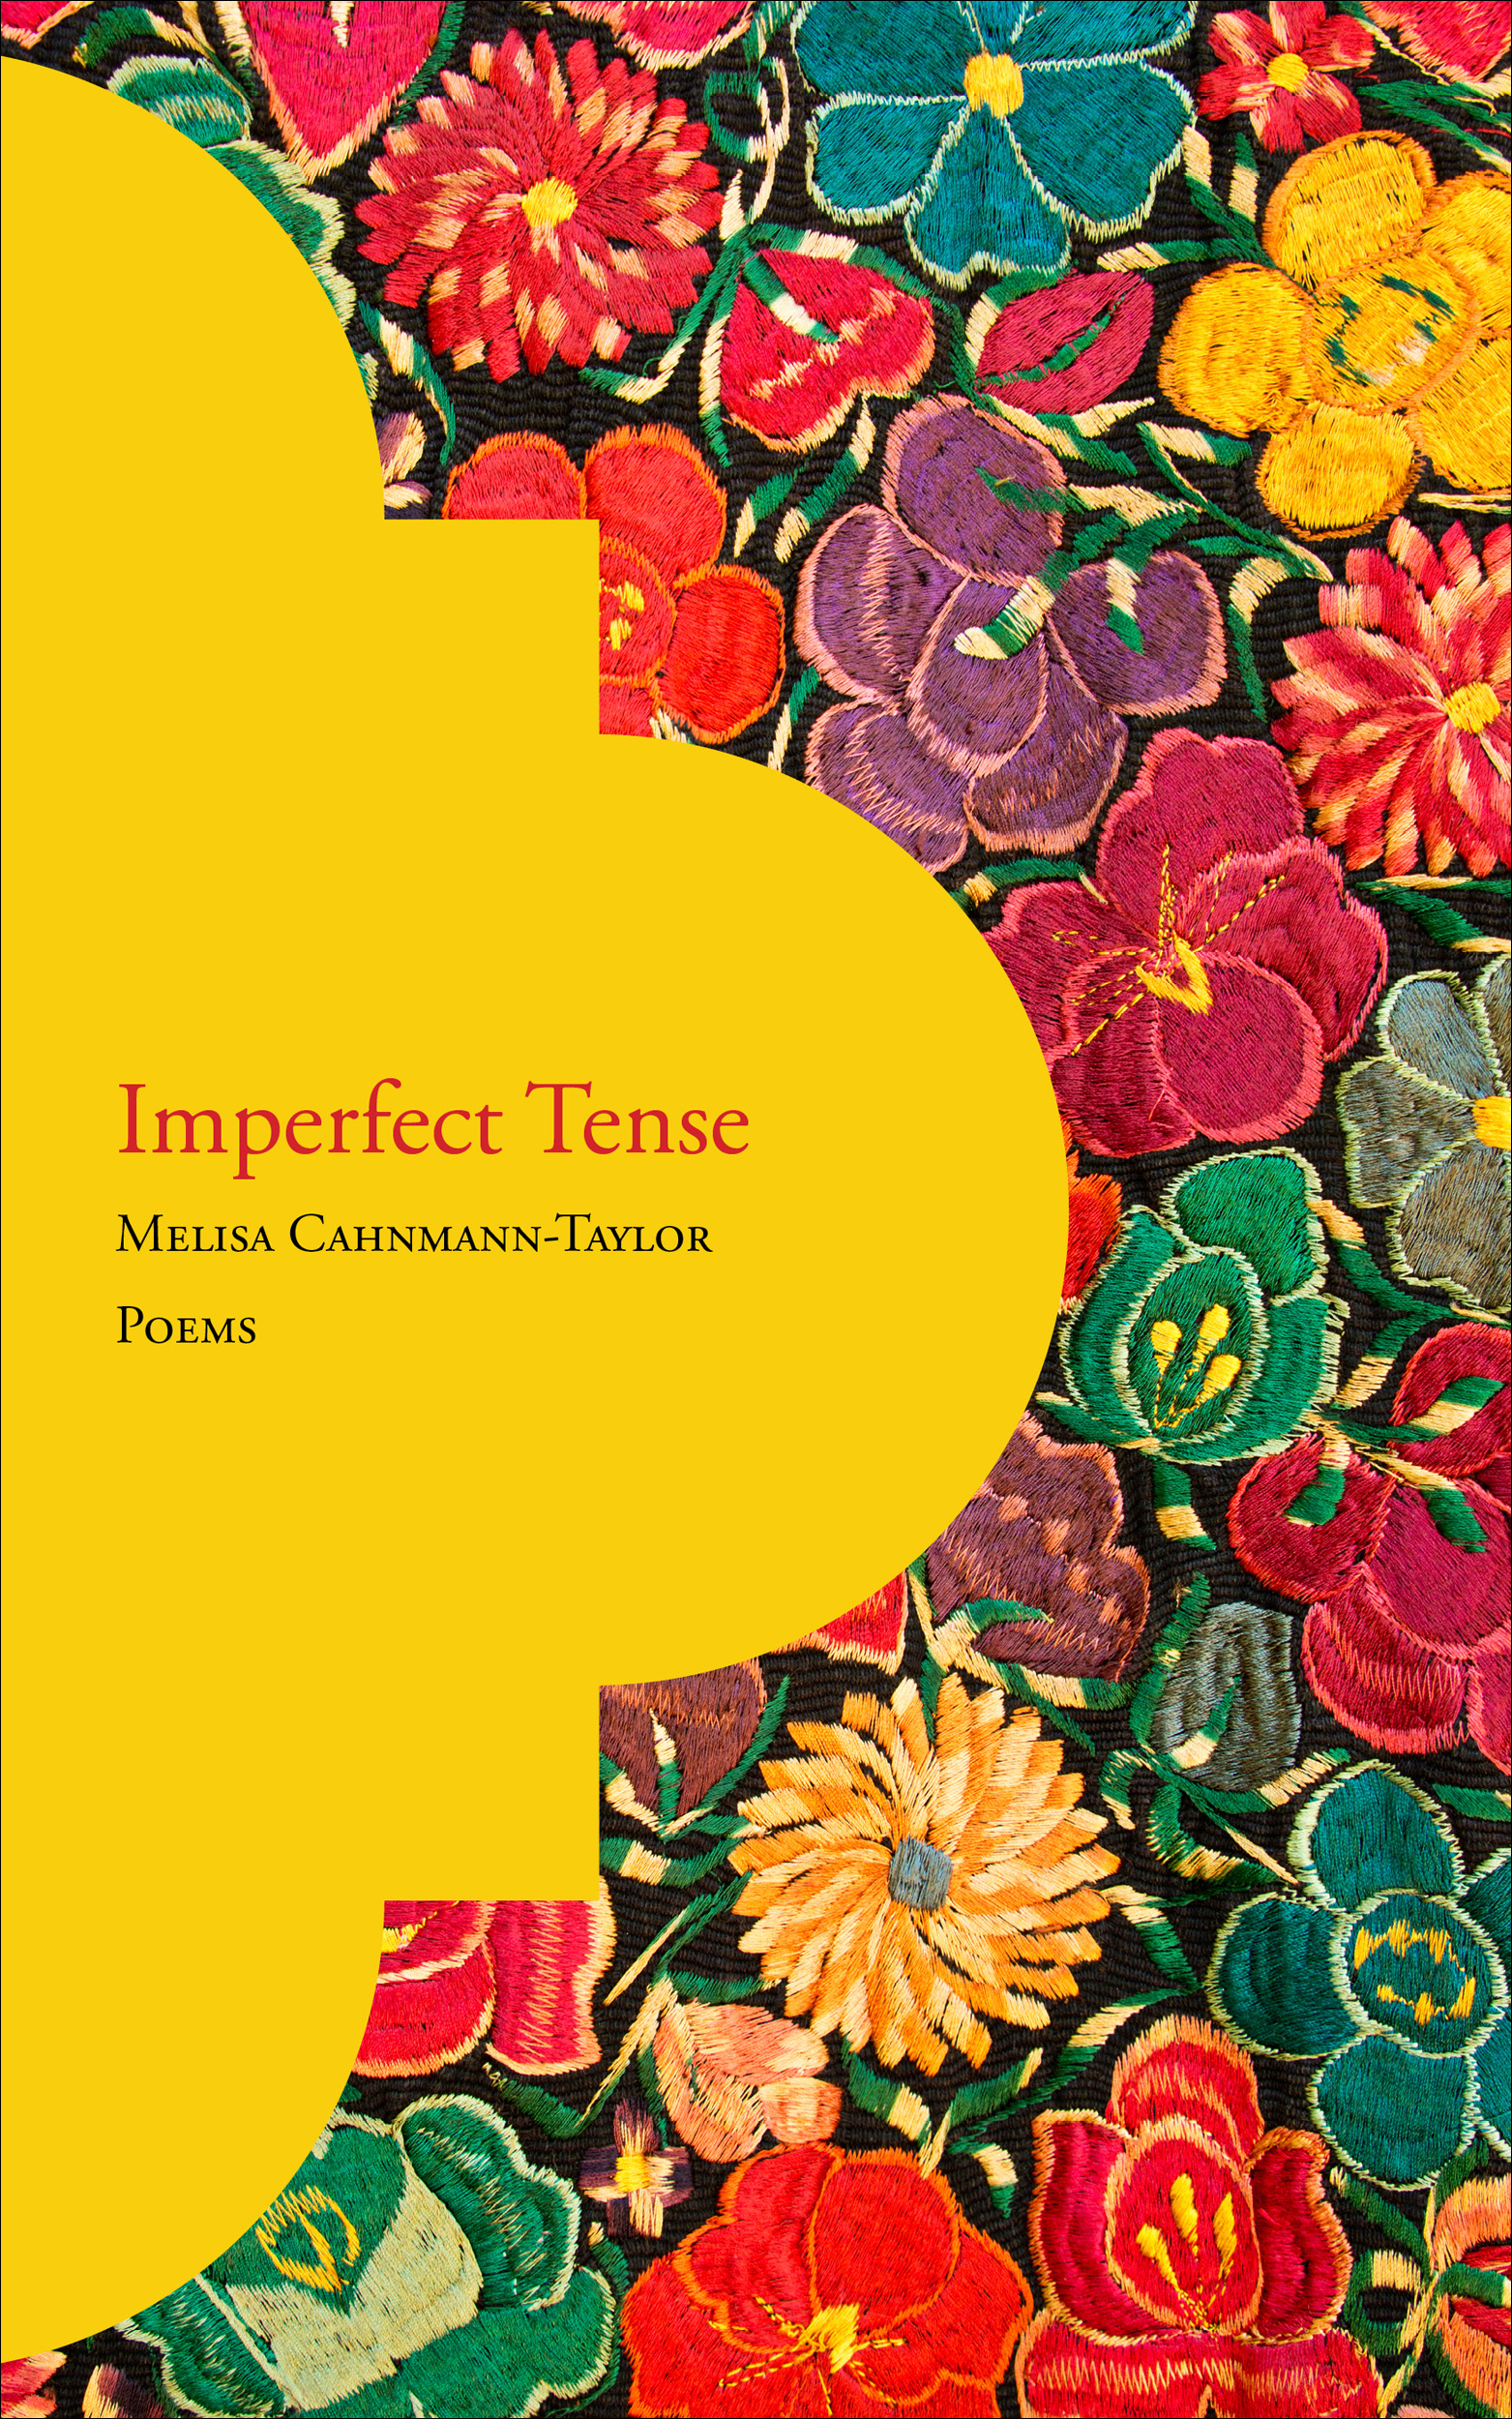 imperfect-tense-by-melisa-cahnmann-taylor-and-inheritance-by-carla